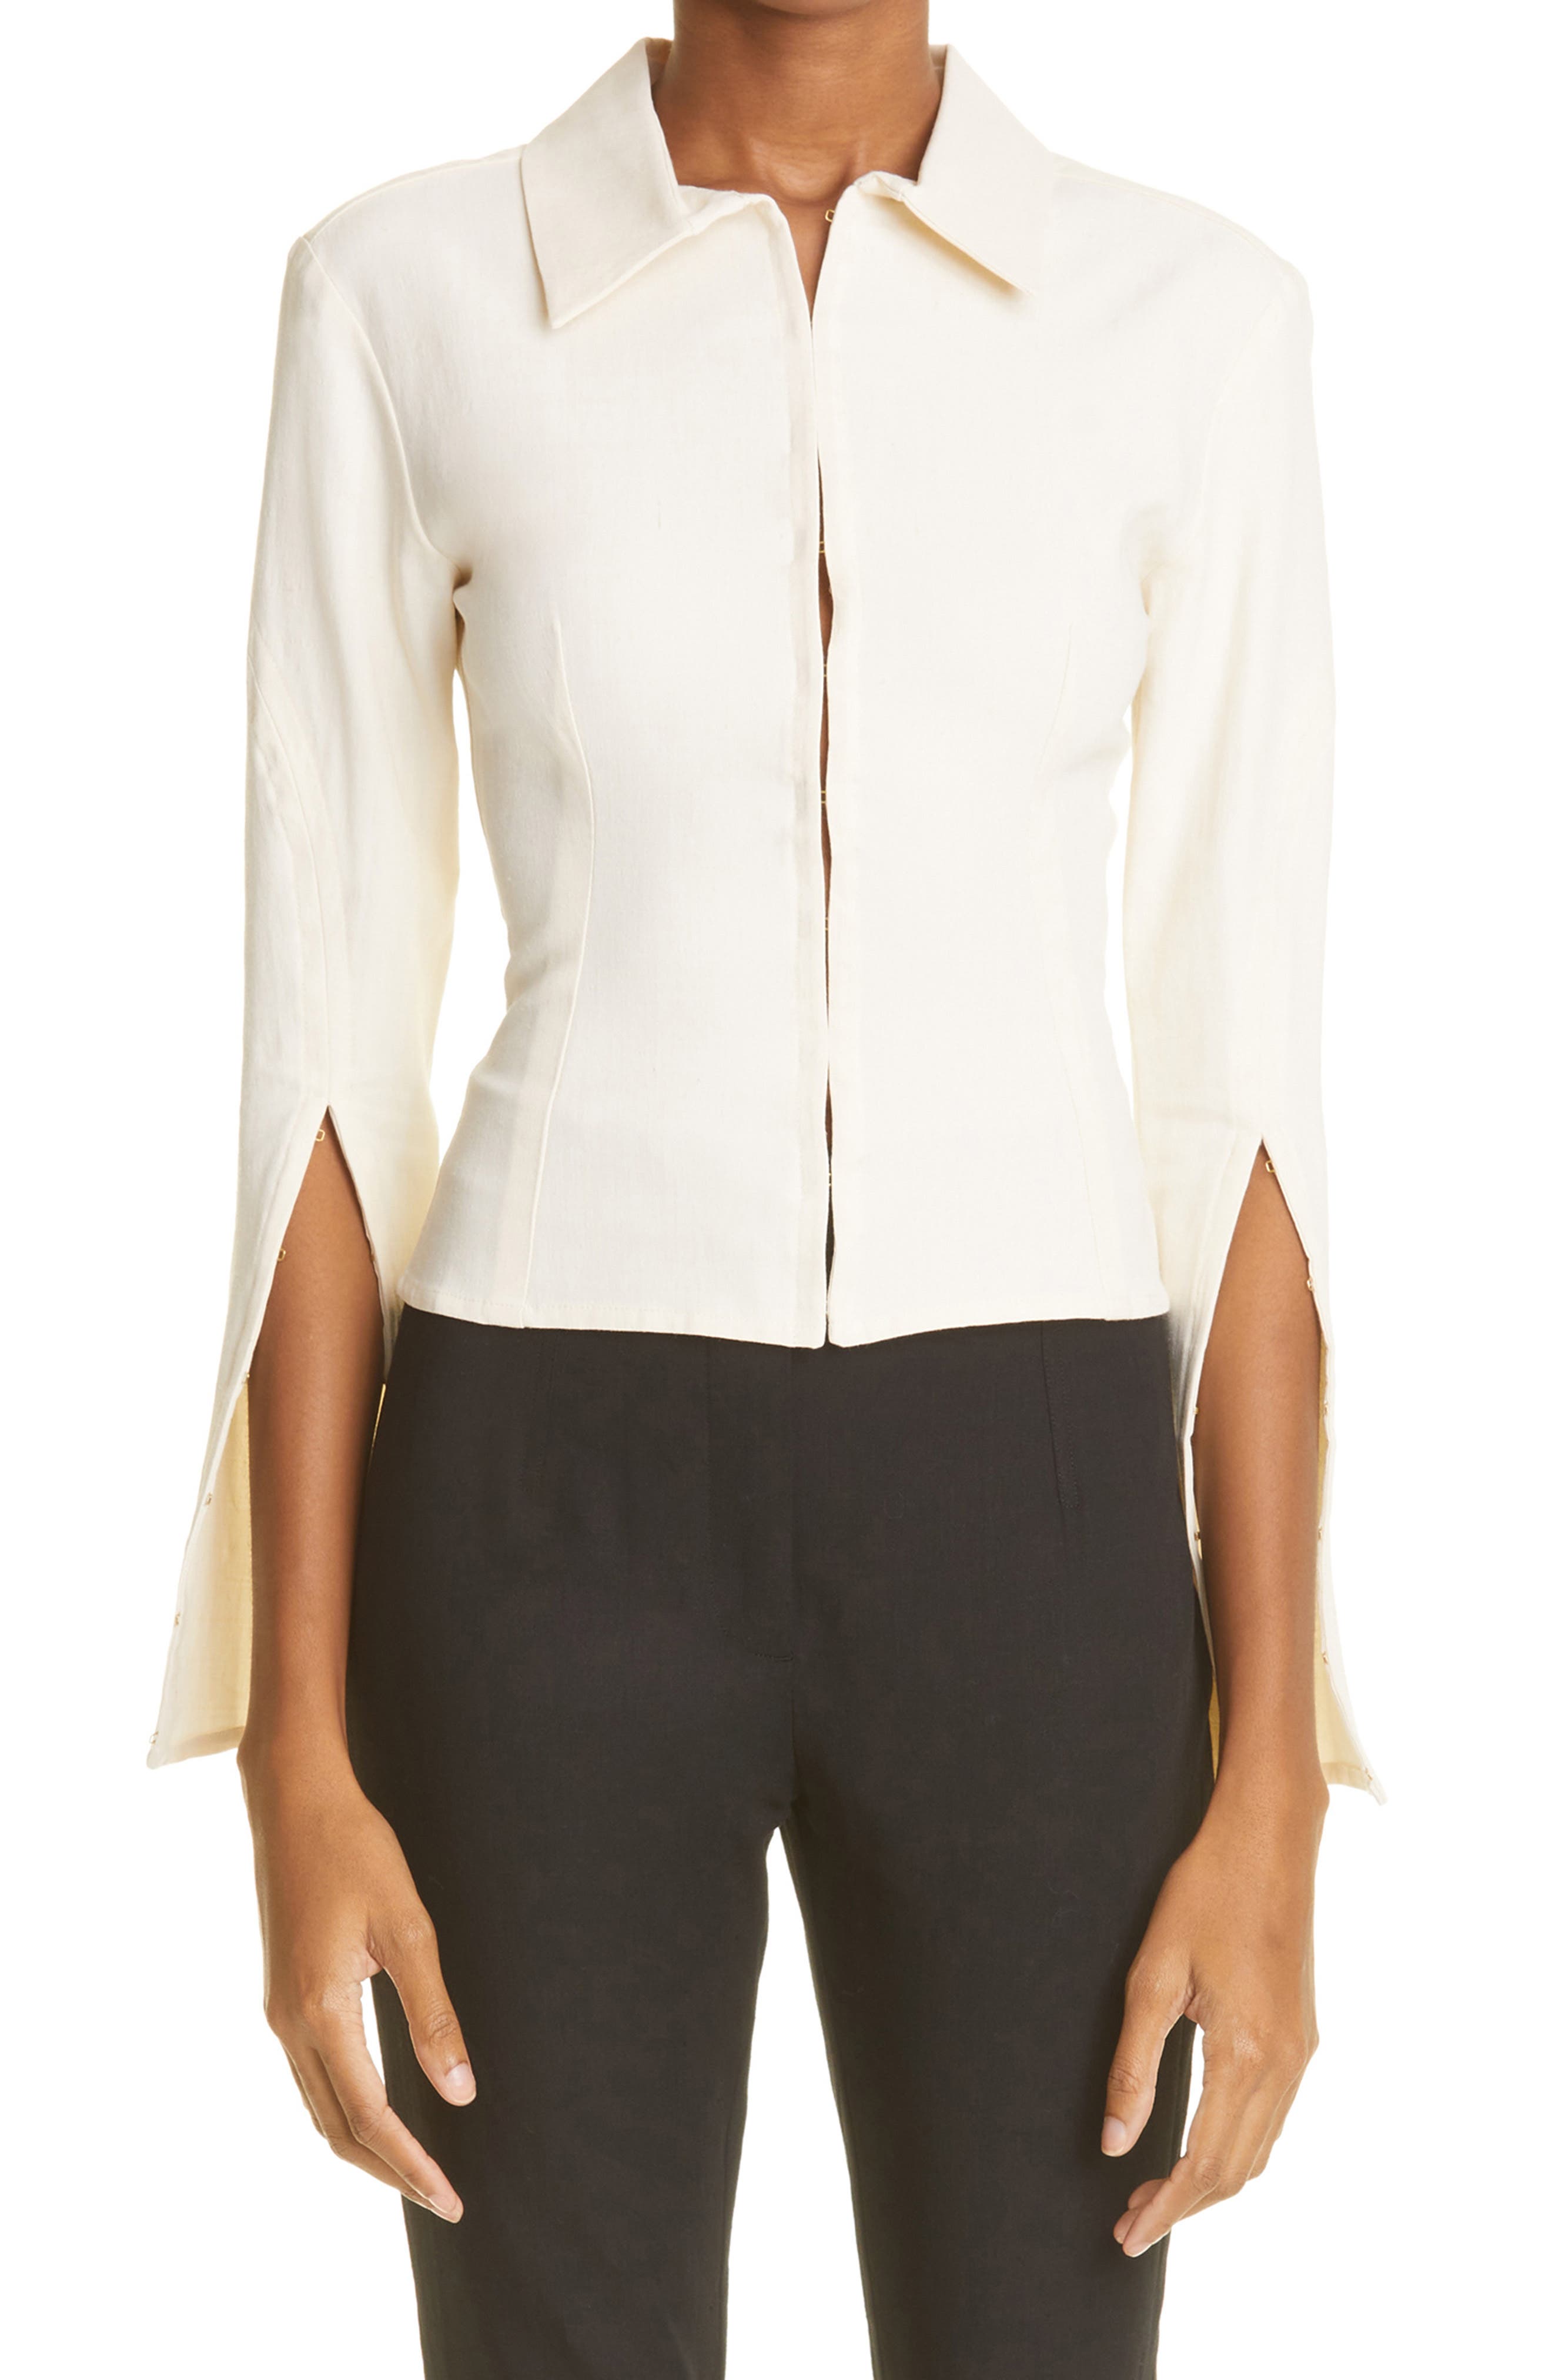 Jacquemus Le Chemise Obiou Shirt in Optic White at Nordstrom